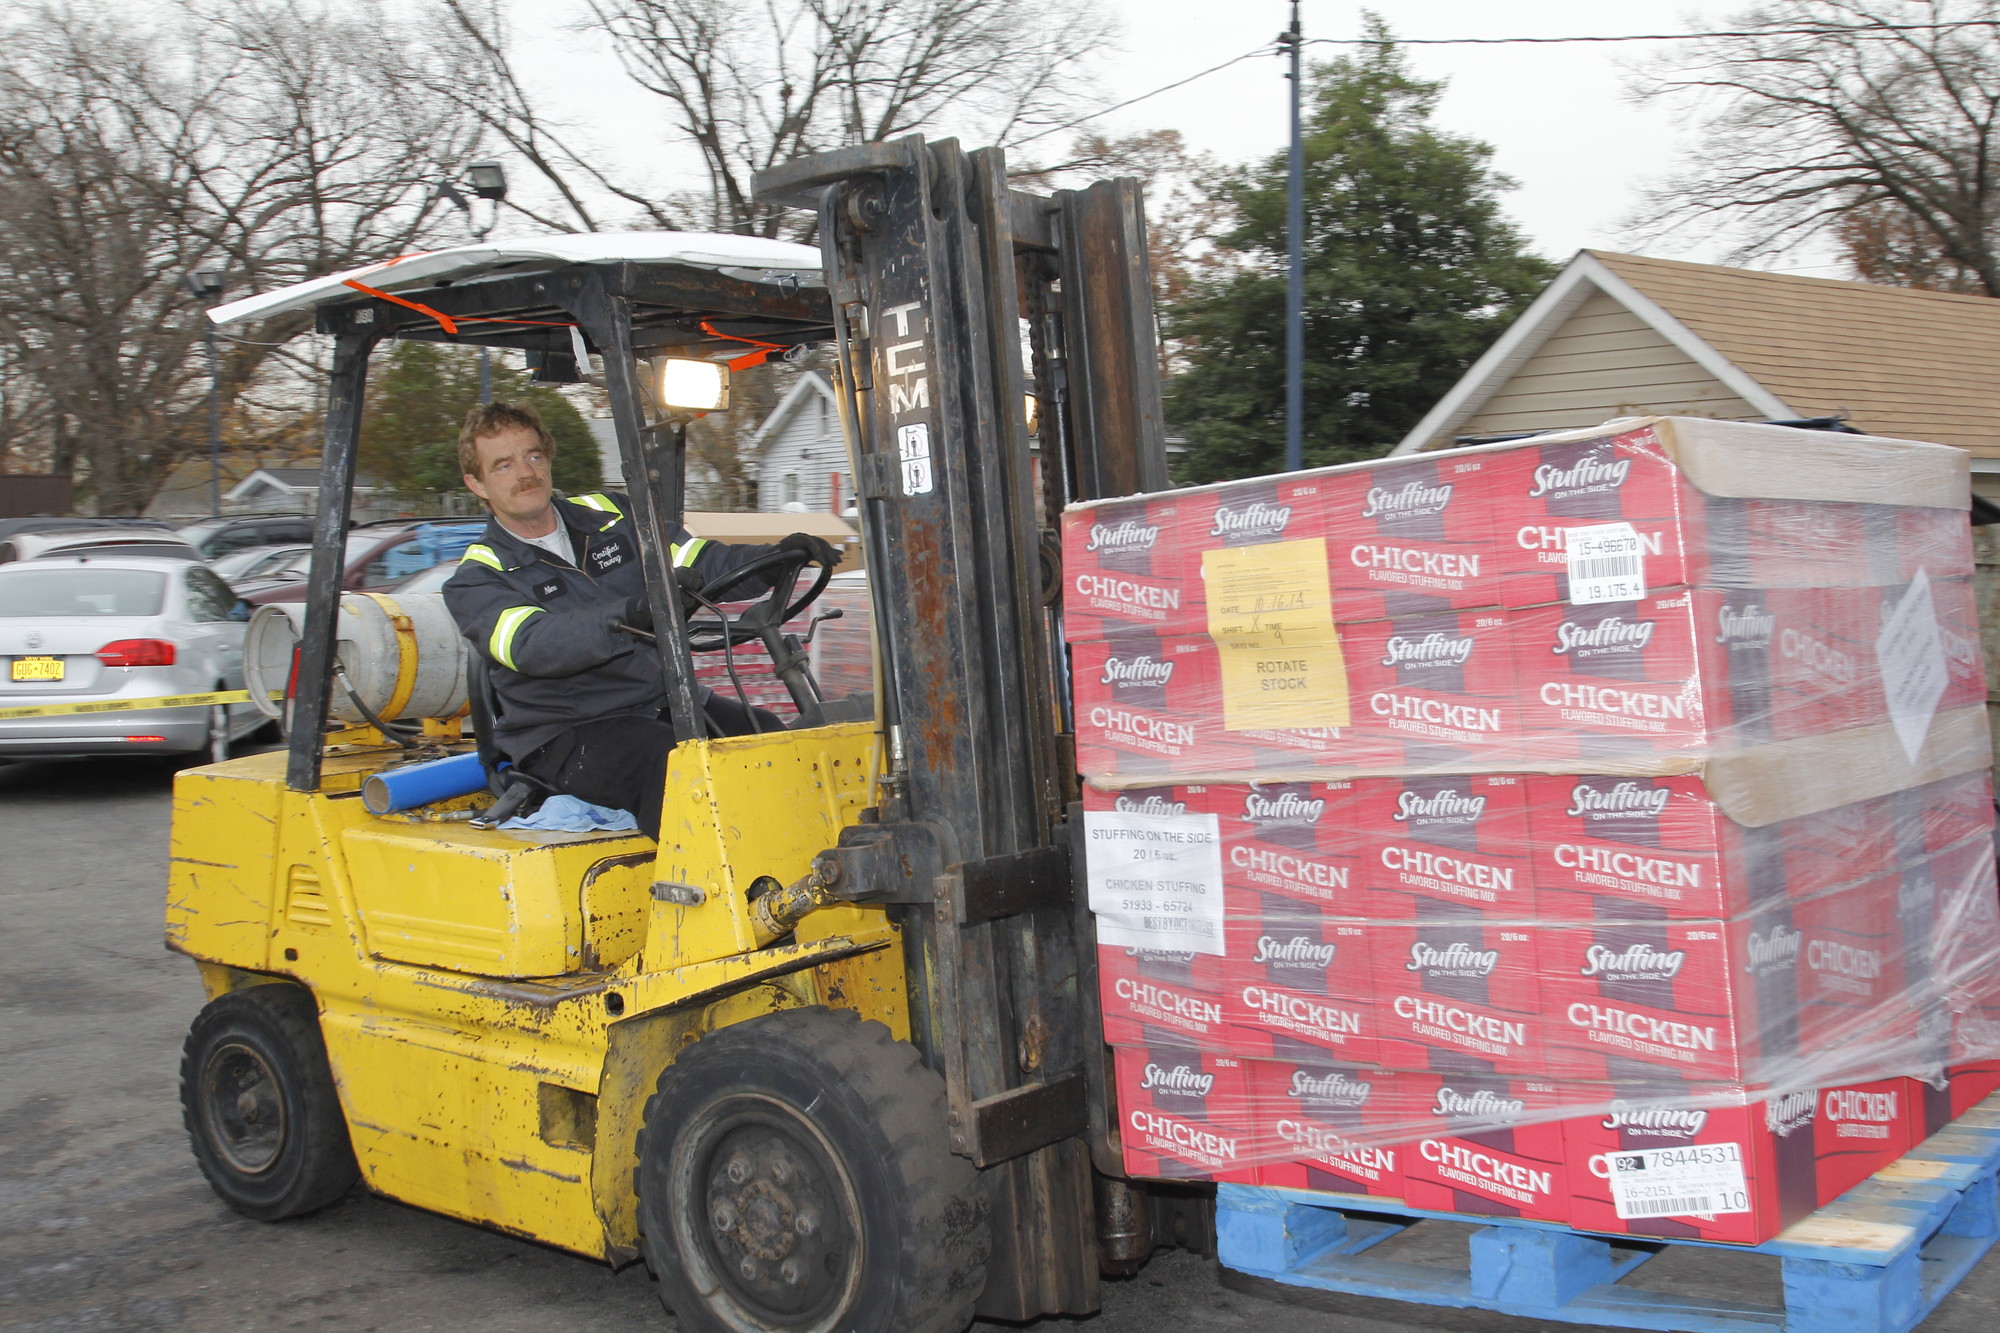 Alex Brown, right, manned the forklift and unloaded pallets of food from the trucks.